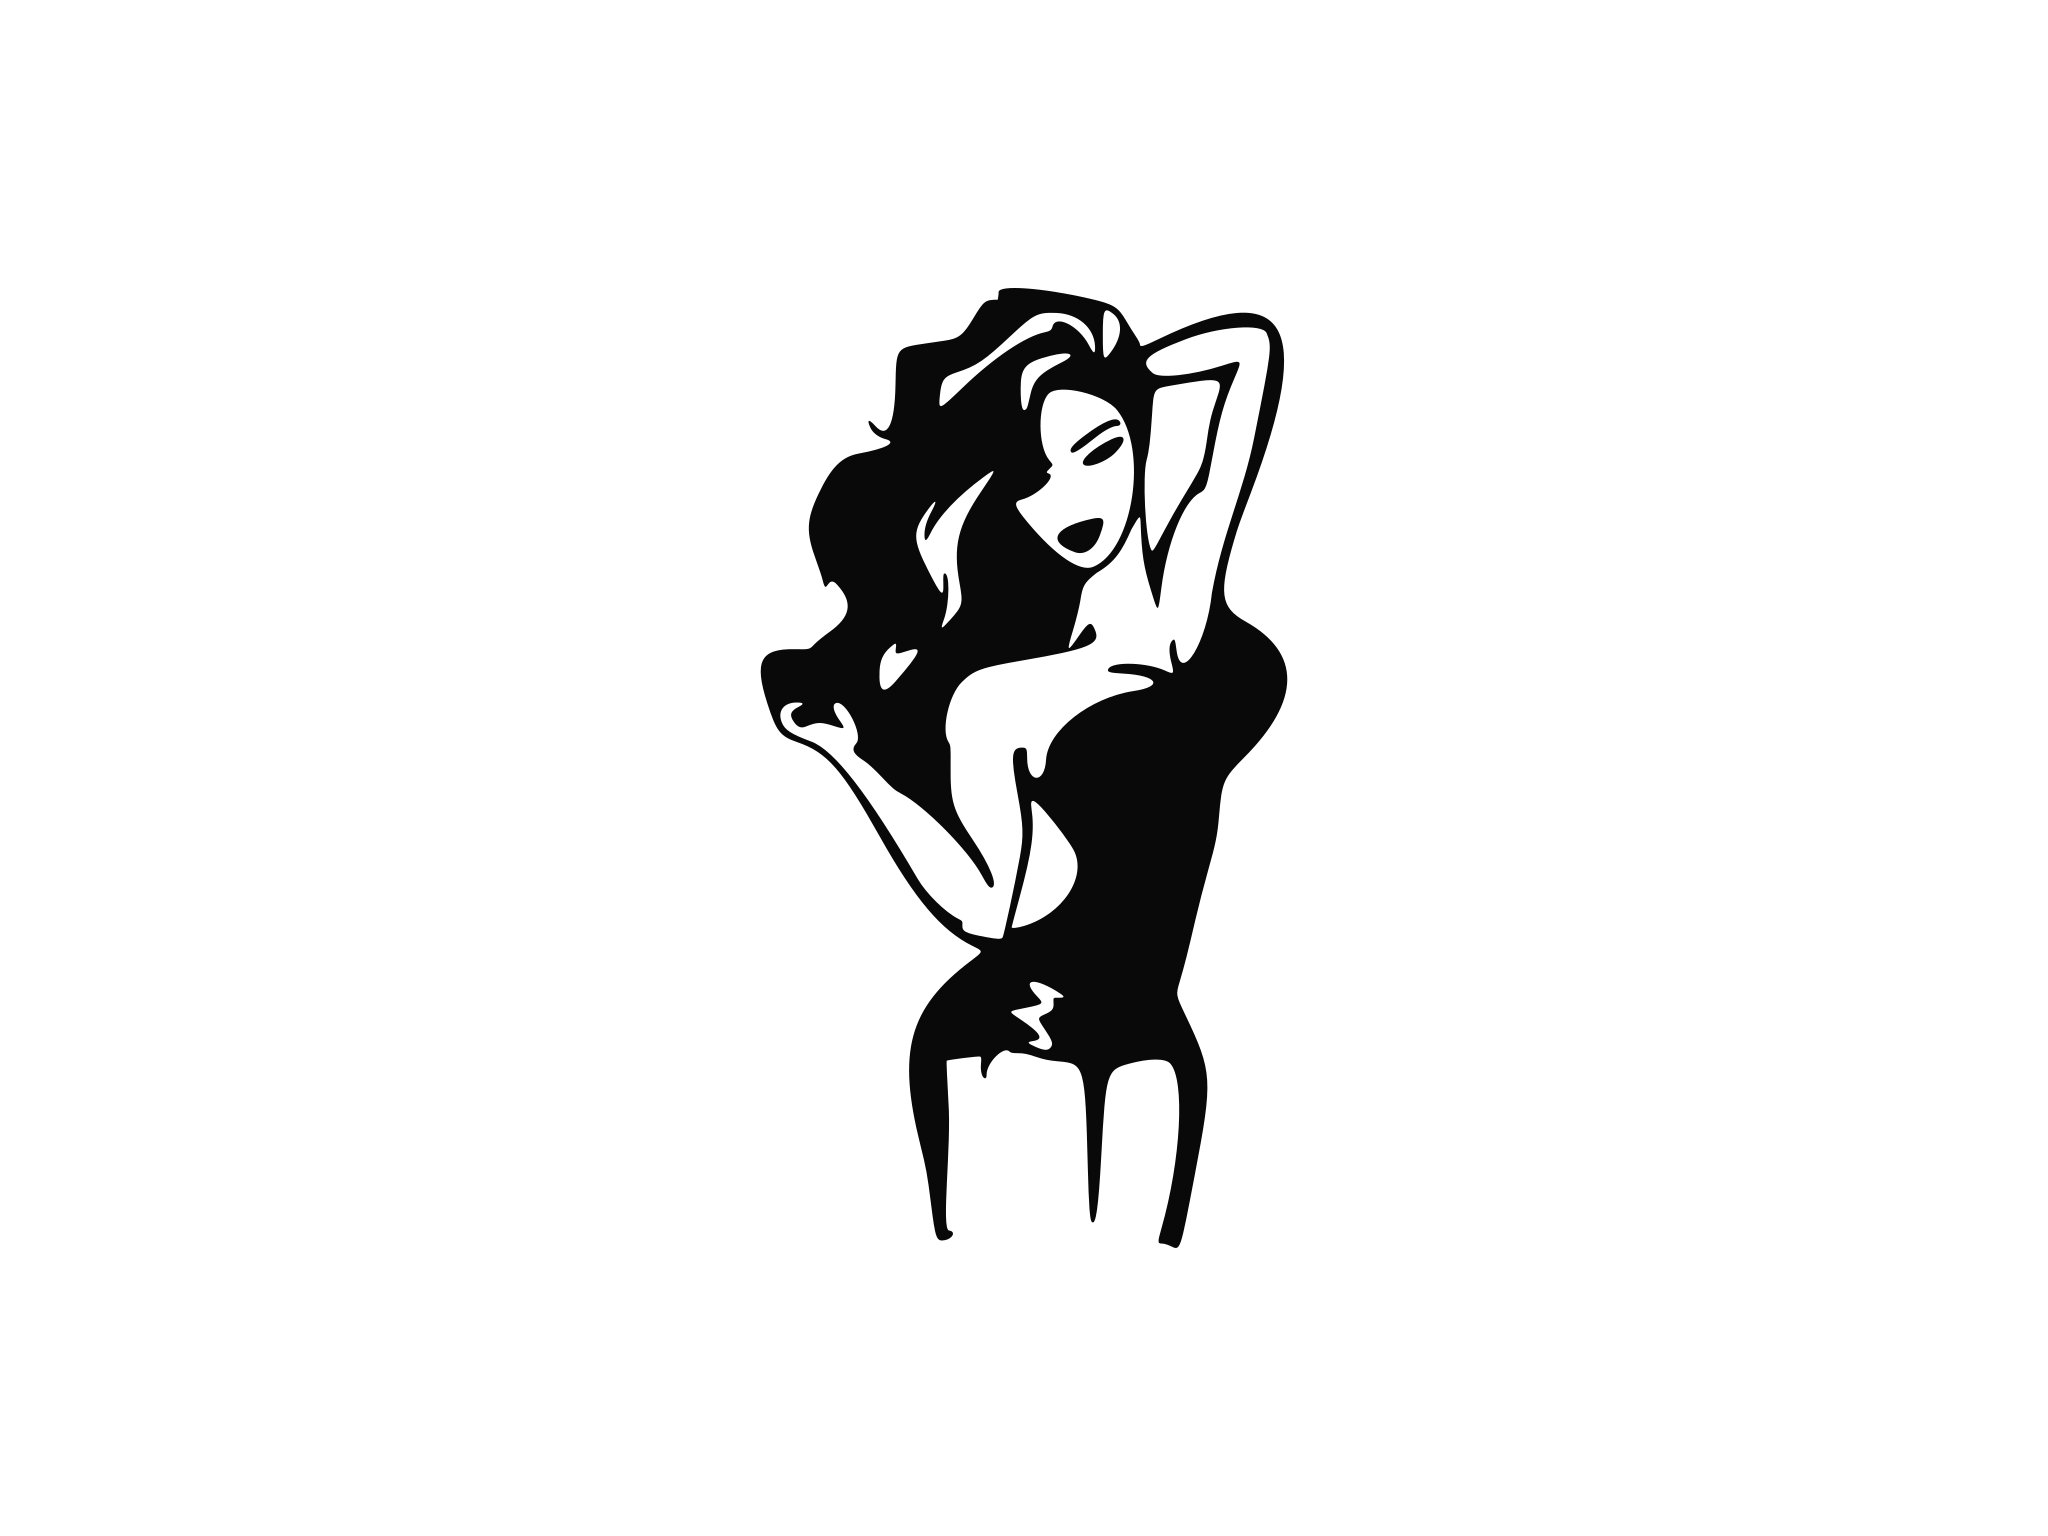 Pin Up Girl Silhouette Vector At Collection Of Pin Up Girl Silhouette Vector 8932